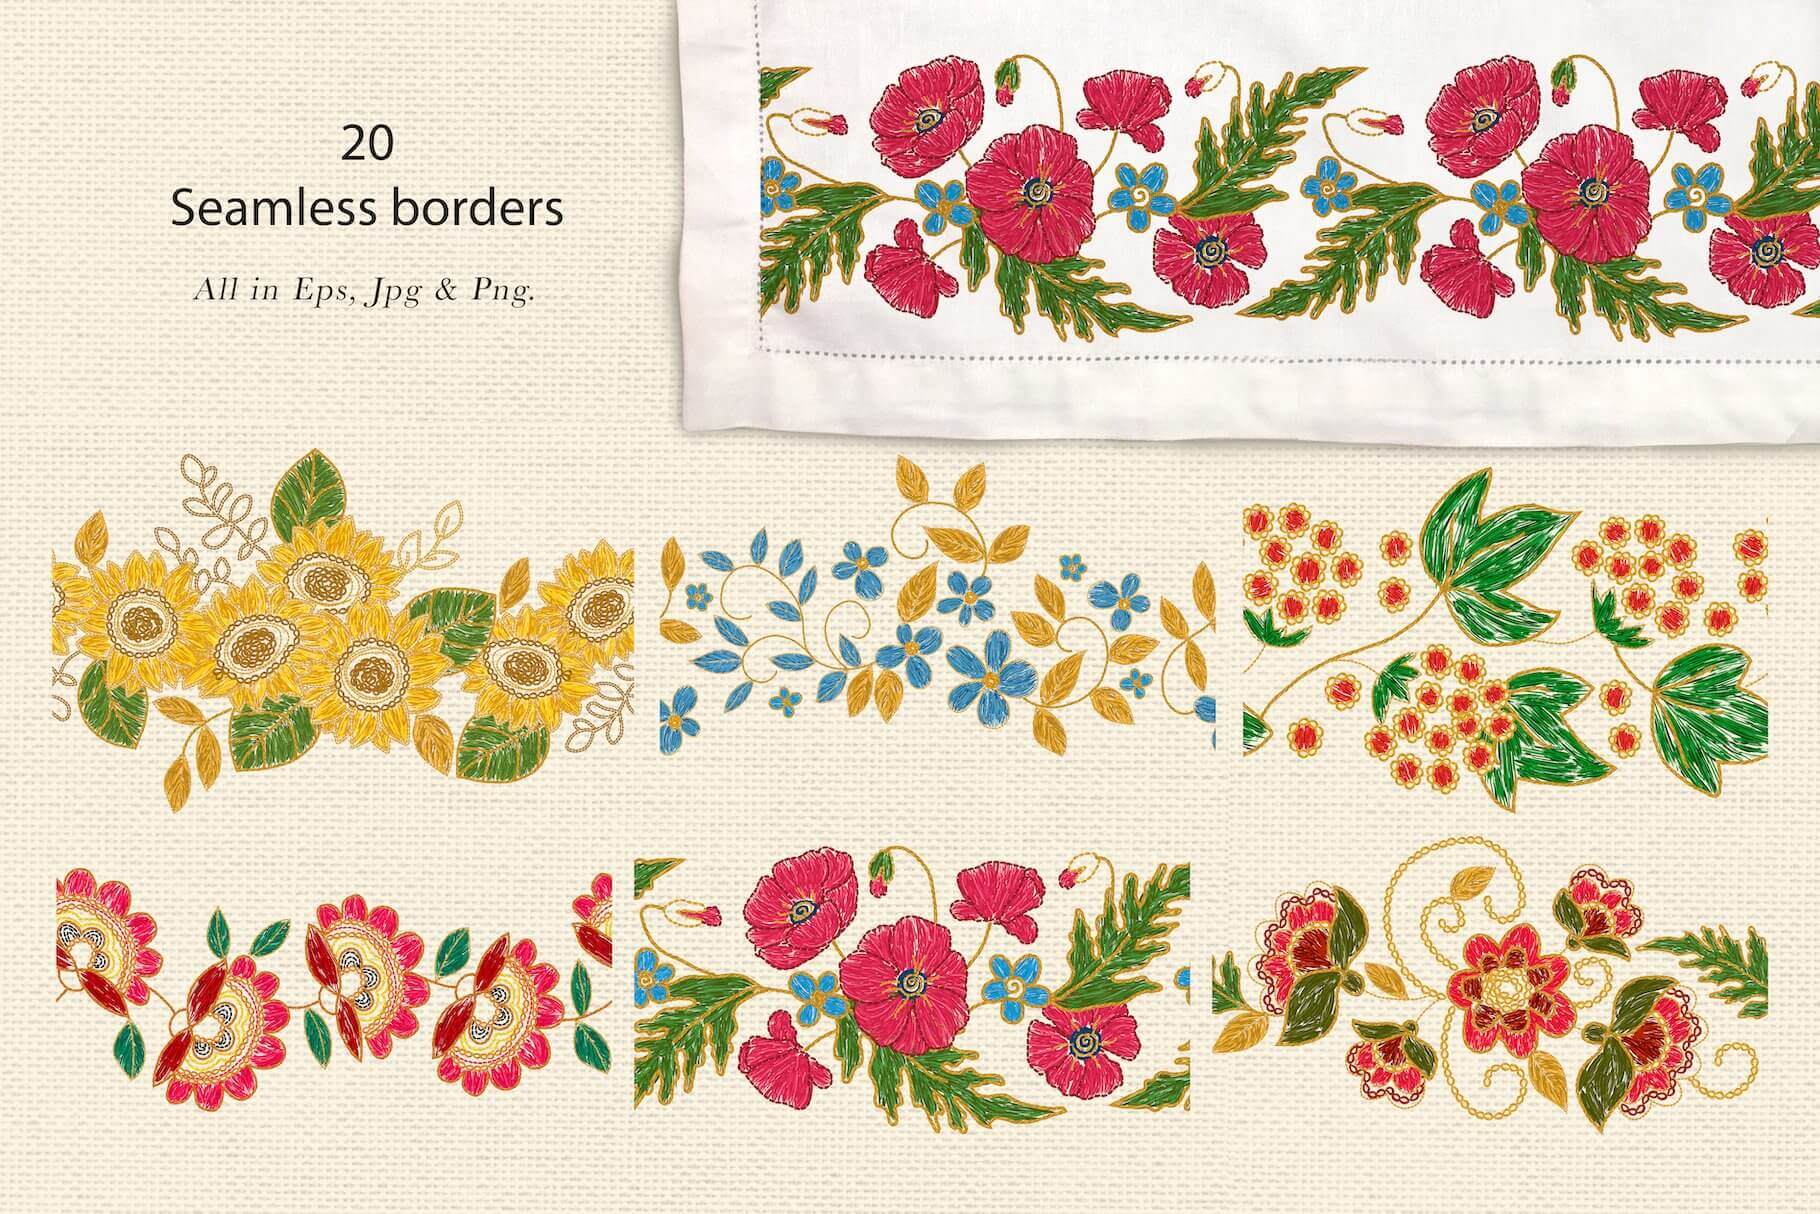 20 seamless borders with with poppies, sunflowers, viburnum and others.